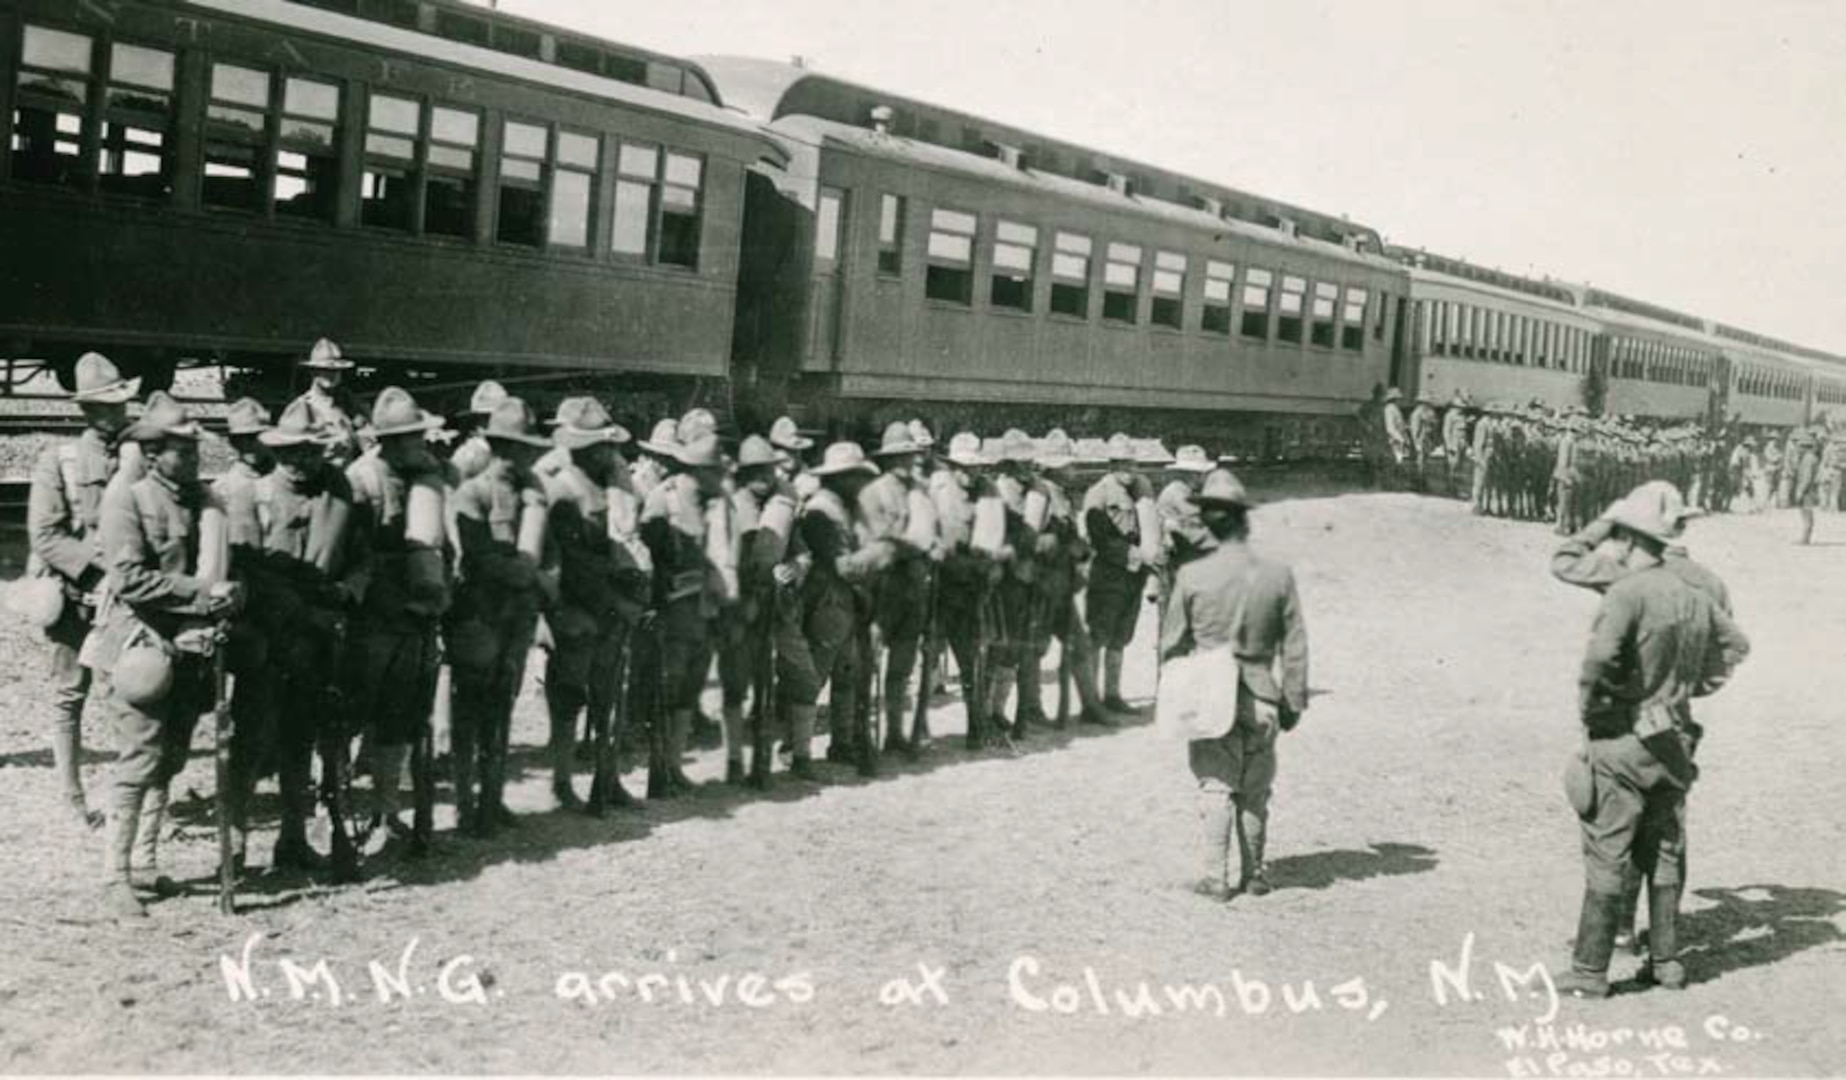 After the disastrous raid on Columbus, New Mexico, by Pancho Villa, the state National Guard sent troops.